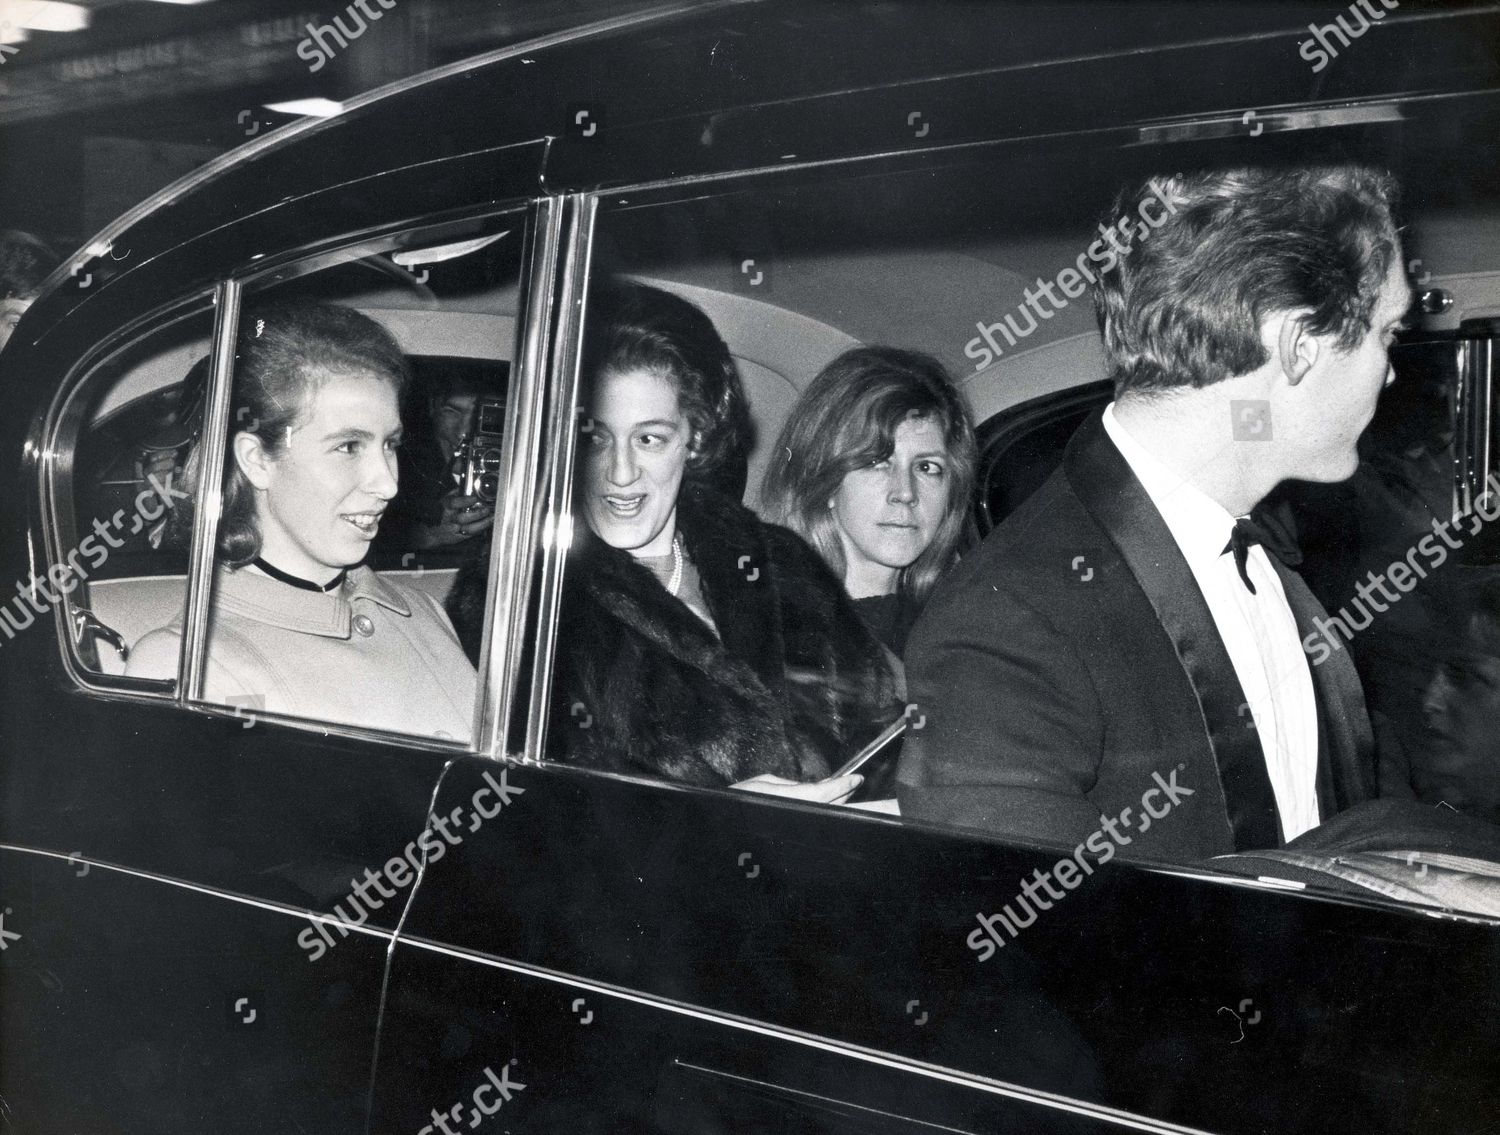 princess-anne-now-princess-royal-december-1967-princess-anne-sees-the-pirates-of-penzance-by-the-doyley-carte-opera-company-she-is-seen-here-leaving-the-saville-theatre-tonight-royalty-shutterstock-editorial-896276a.jpg